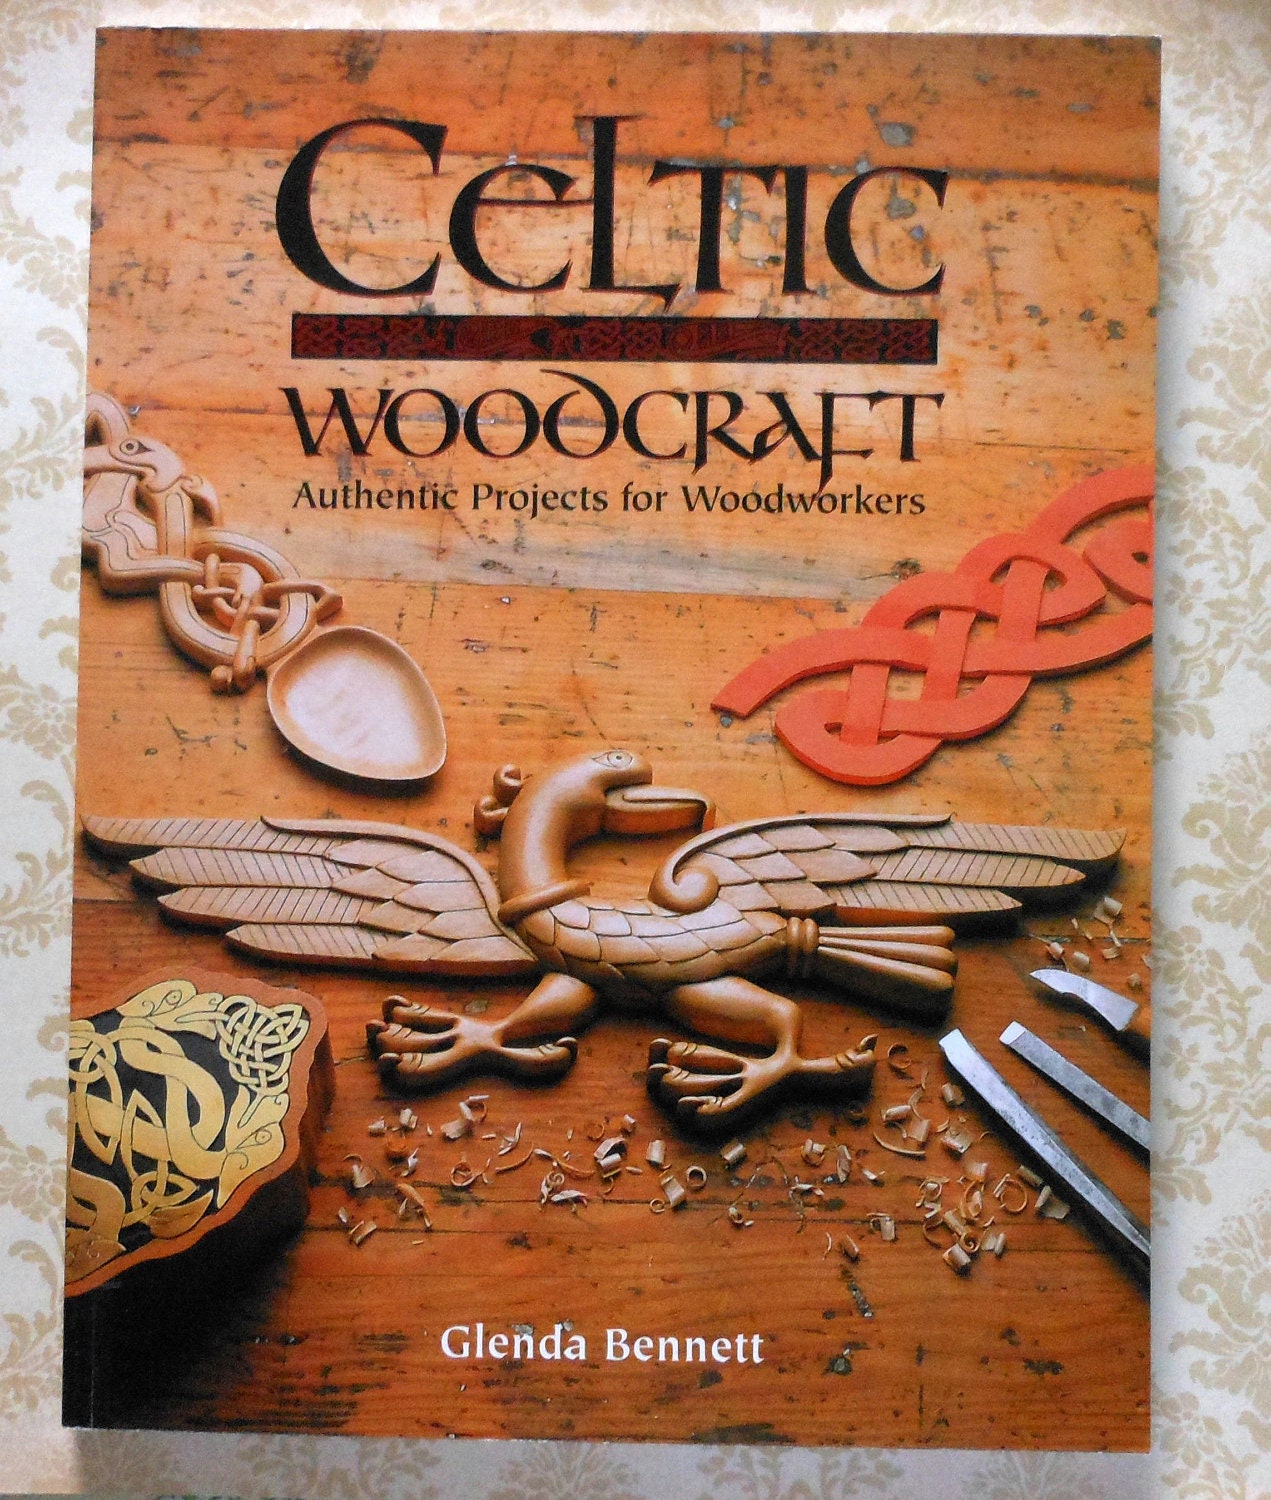 Celtic Woodcraft: Authentic Projects for Woodworkers Glenda Bennett